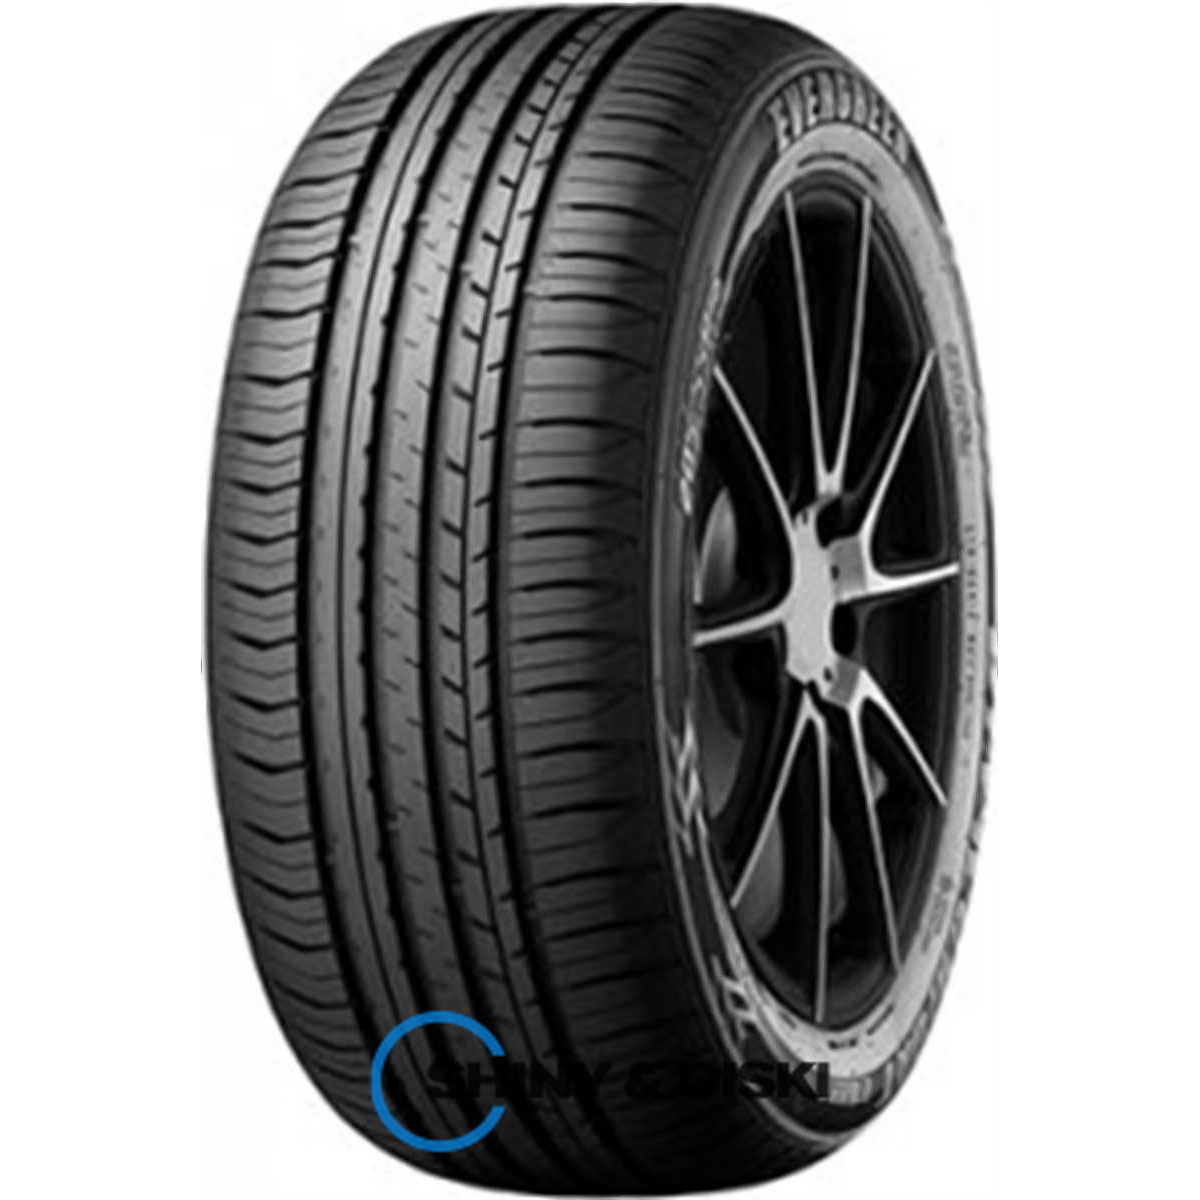 evergreen eh226 175/70 r13 82t